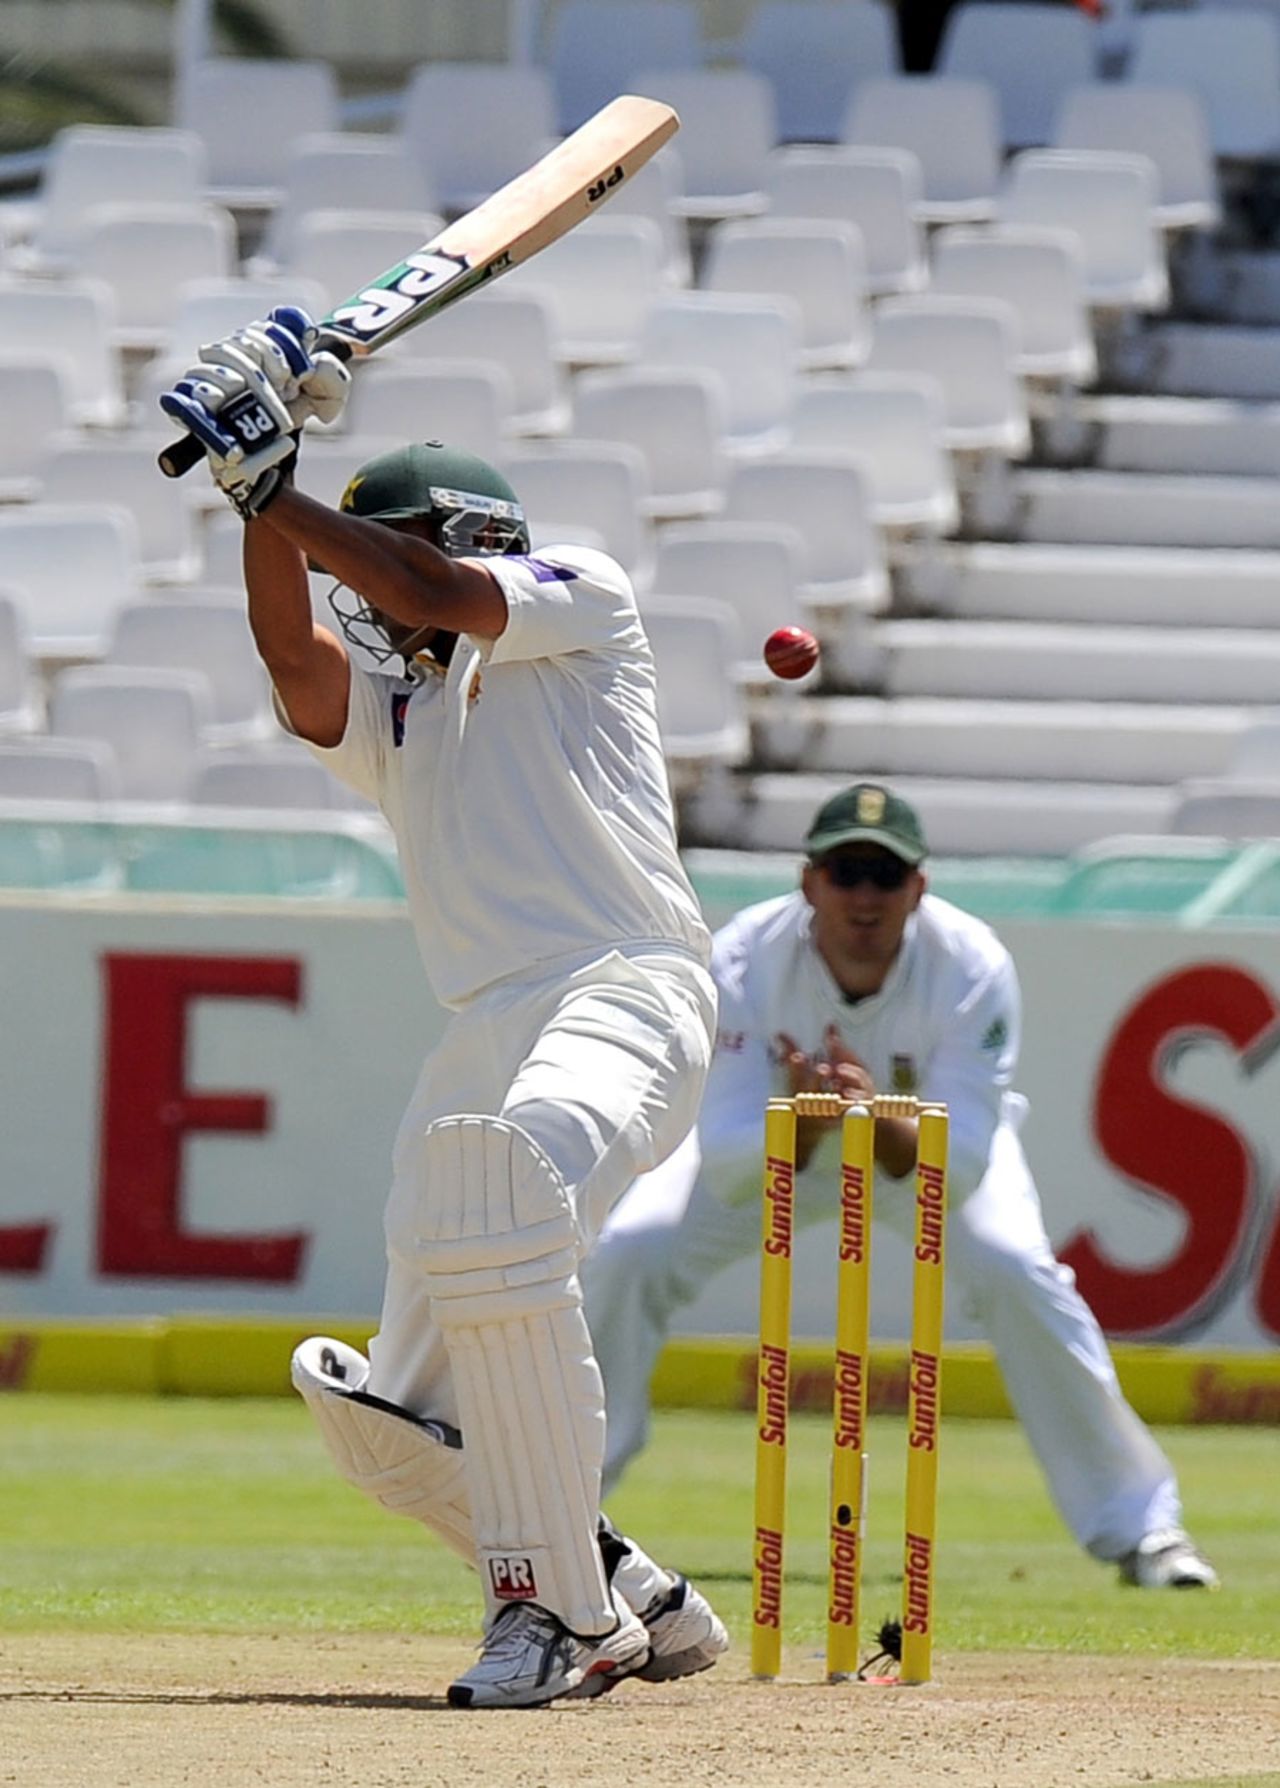 Younis Khan wafts outside off stump, South Africa v Pakistan, 2nd Test, Cape Town, 1st day, February 14, 2013